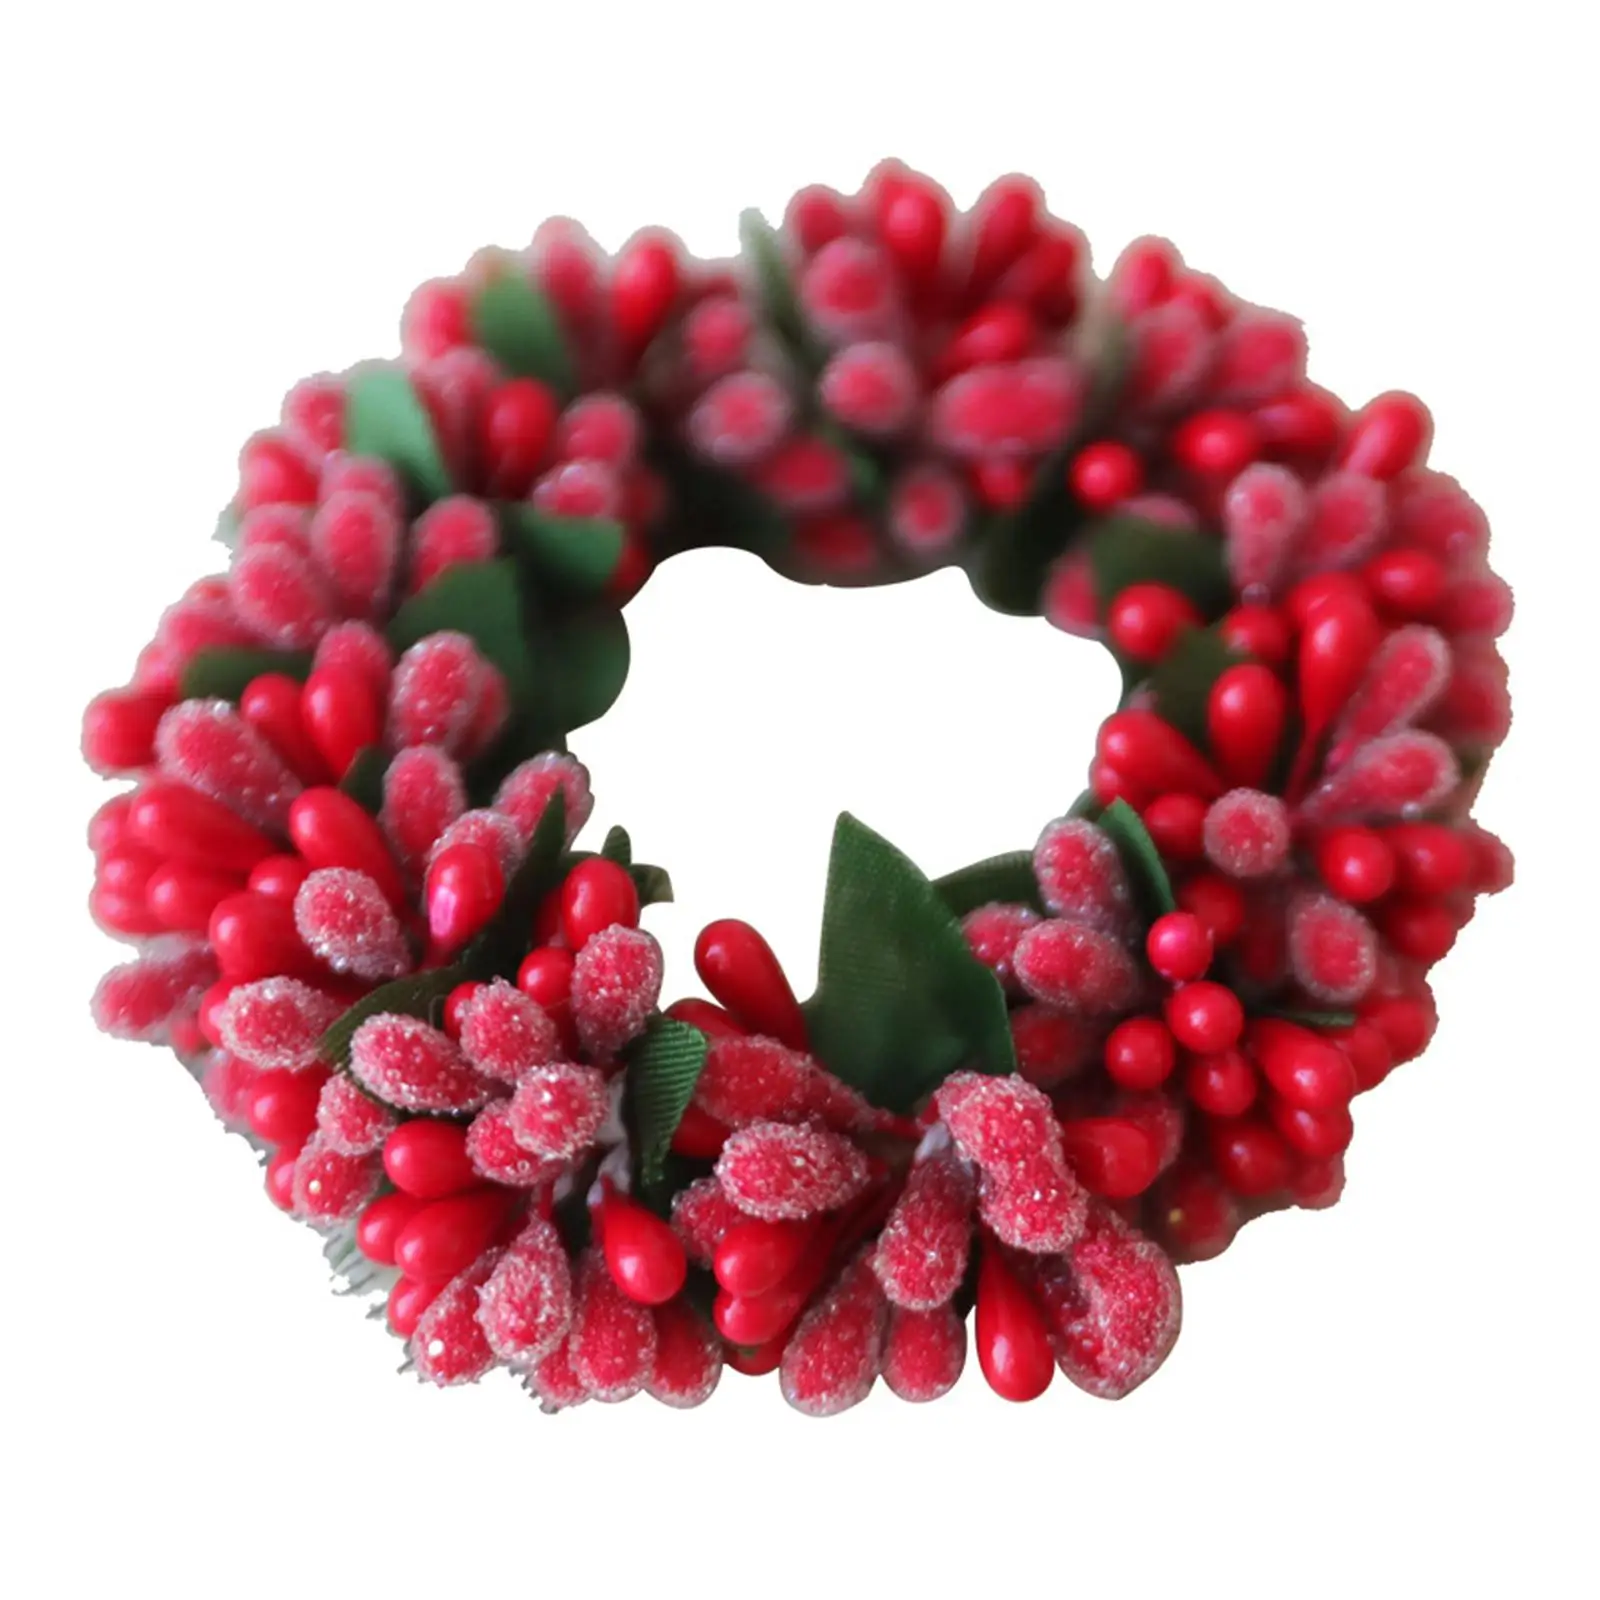 6Pcs Red Berries Candle Ring Wreath Small Boho Wreath for Table Home Dinner